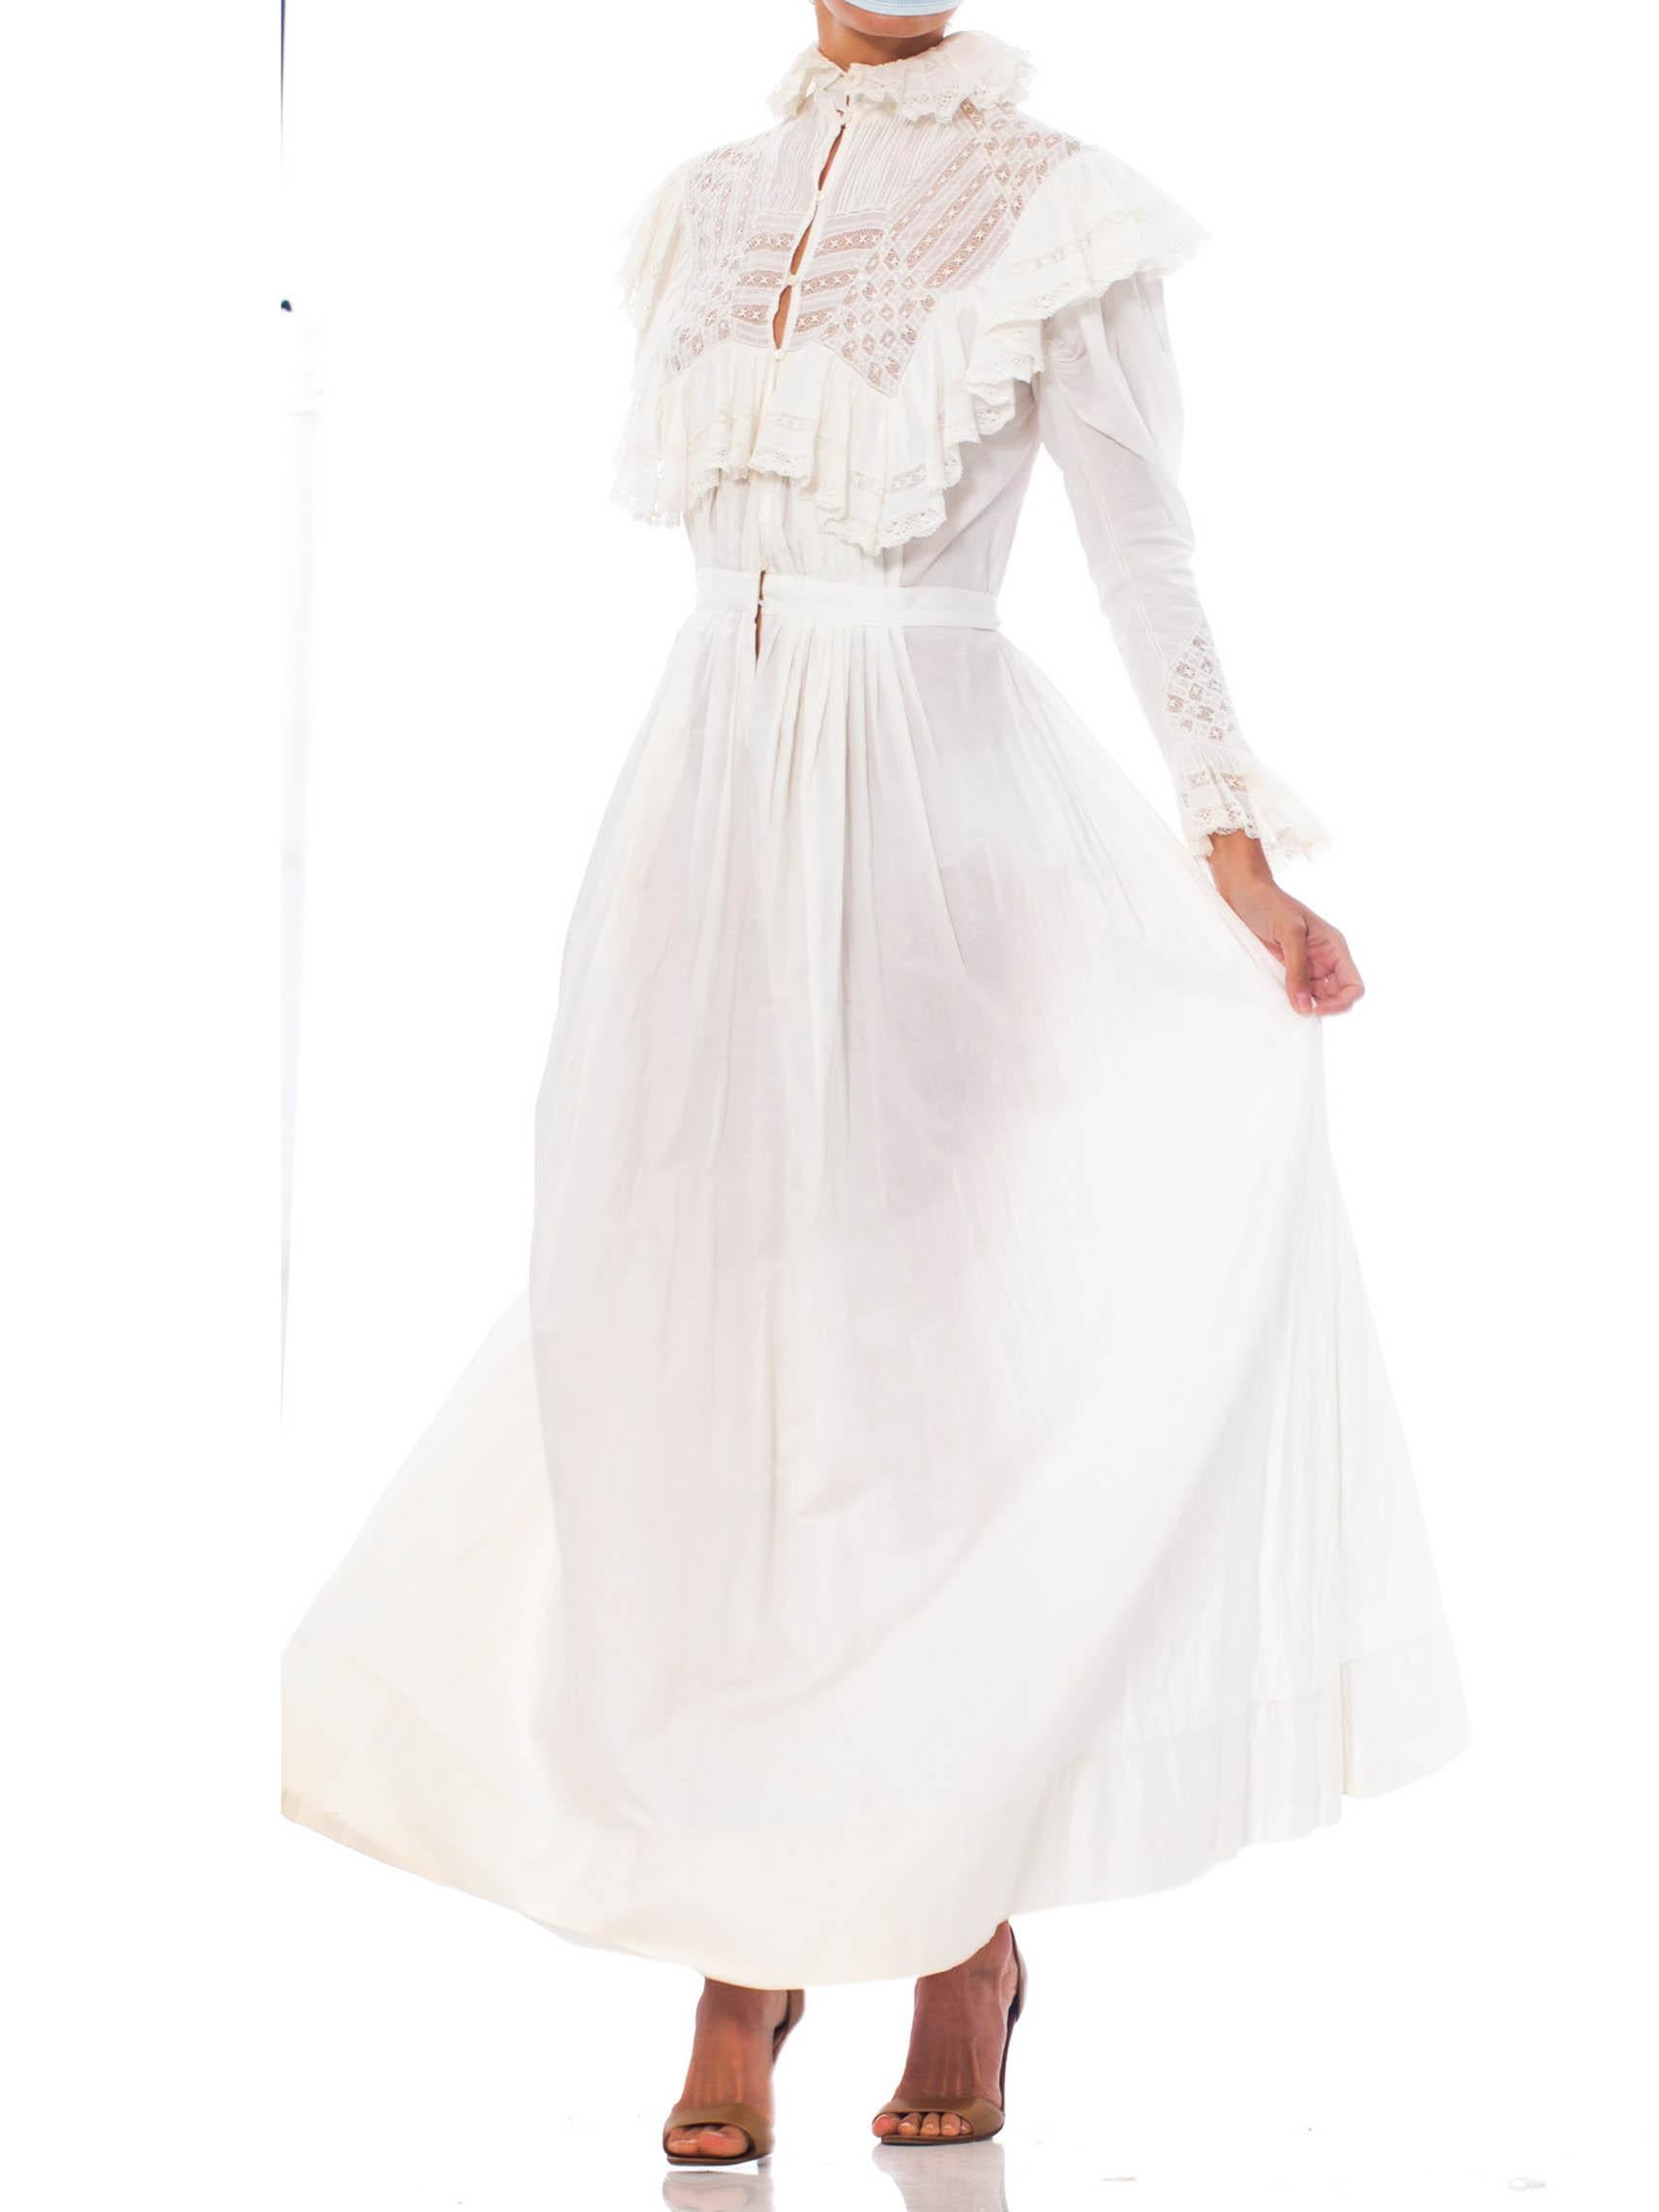 Women's Victorian White Organic Cotton & Lace Belle Epoch Sleeve House Dress With Sash 